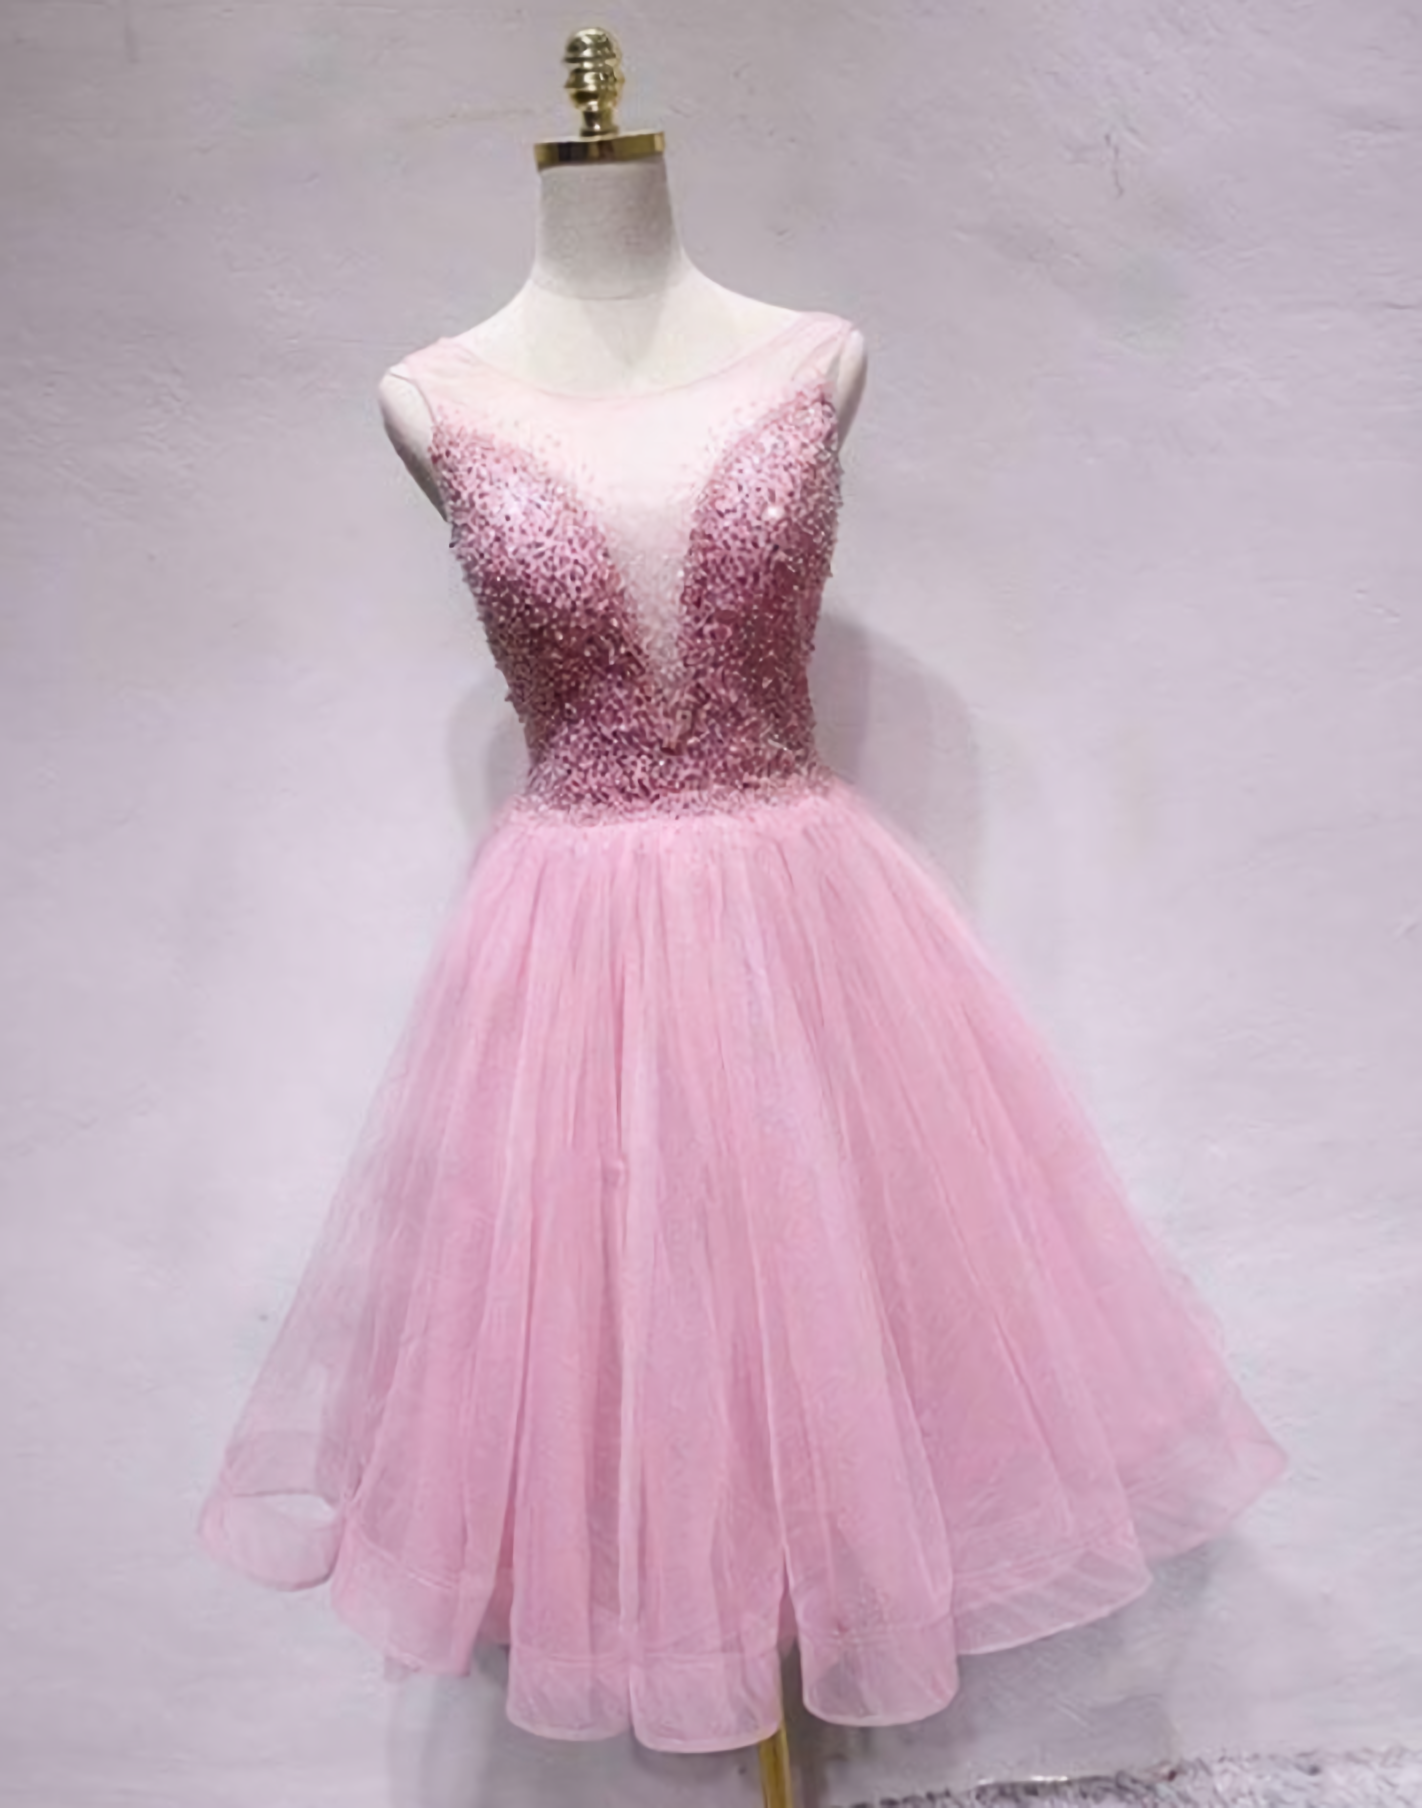 Spark Queen Pink Tulle Sequin Short Corset Prom Dress, Pink Corset Homecoming Dress outfit, Evening Dresses Australia